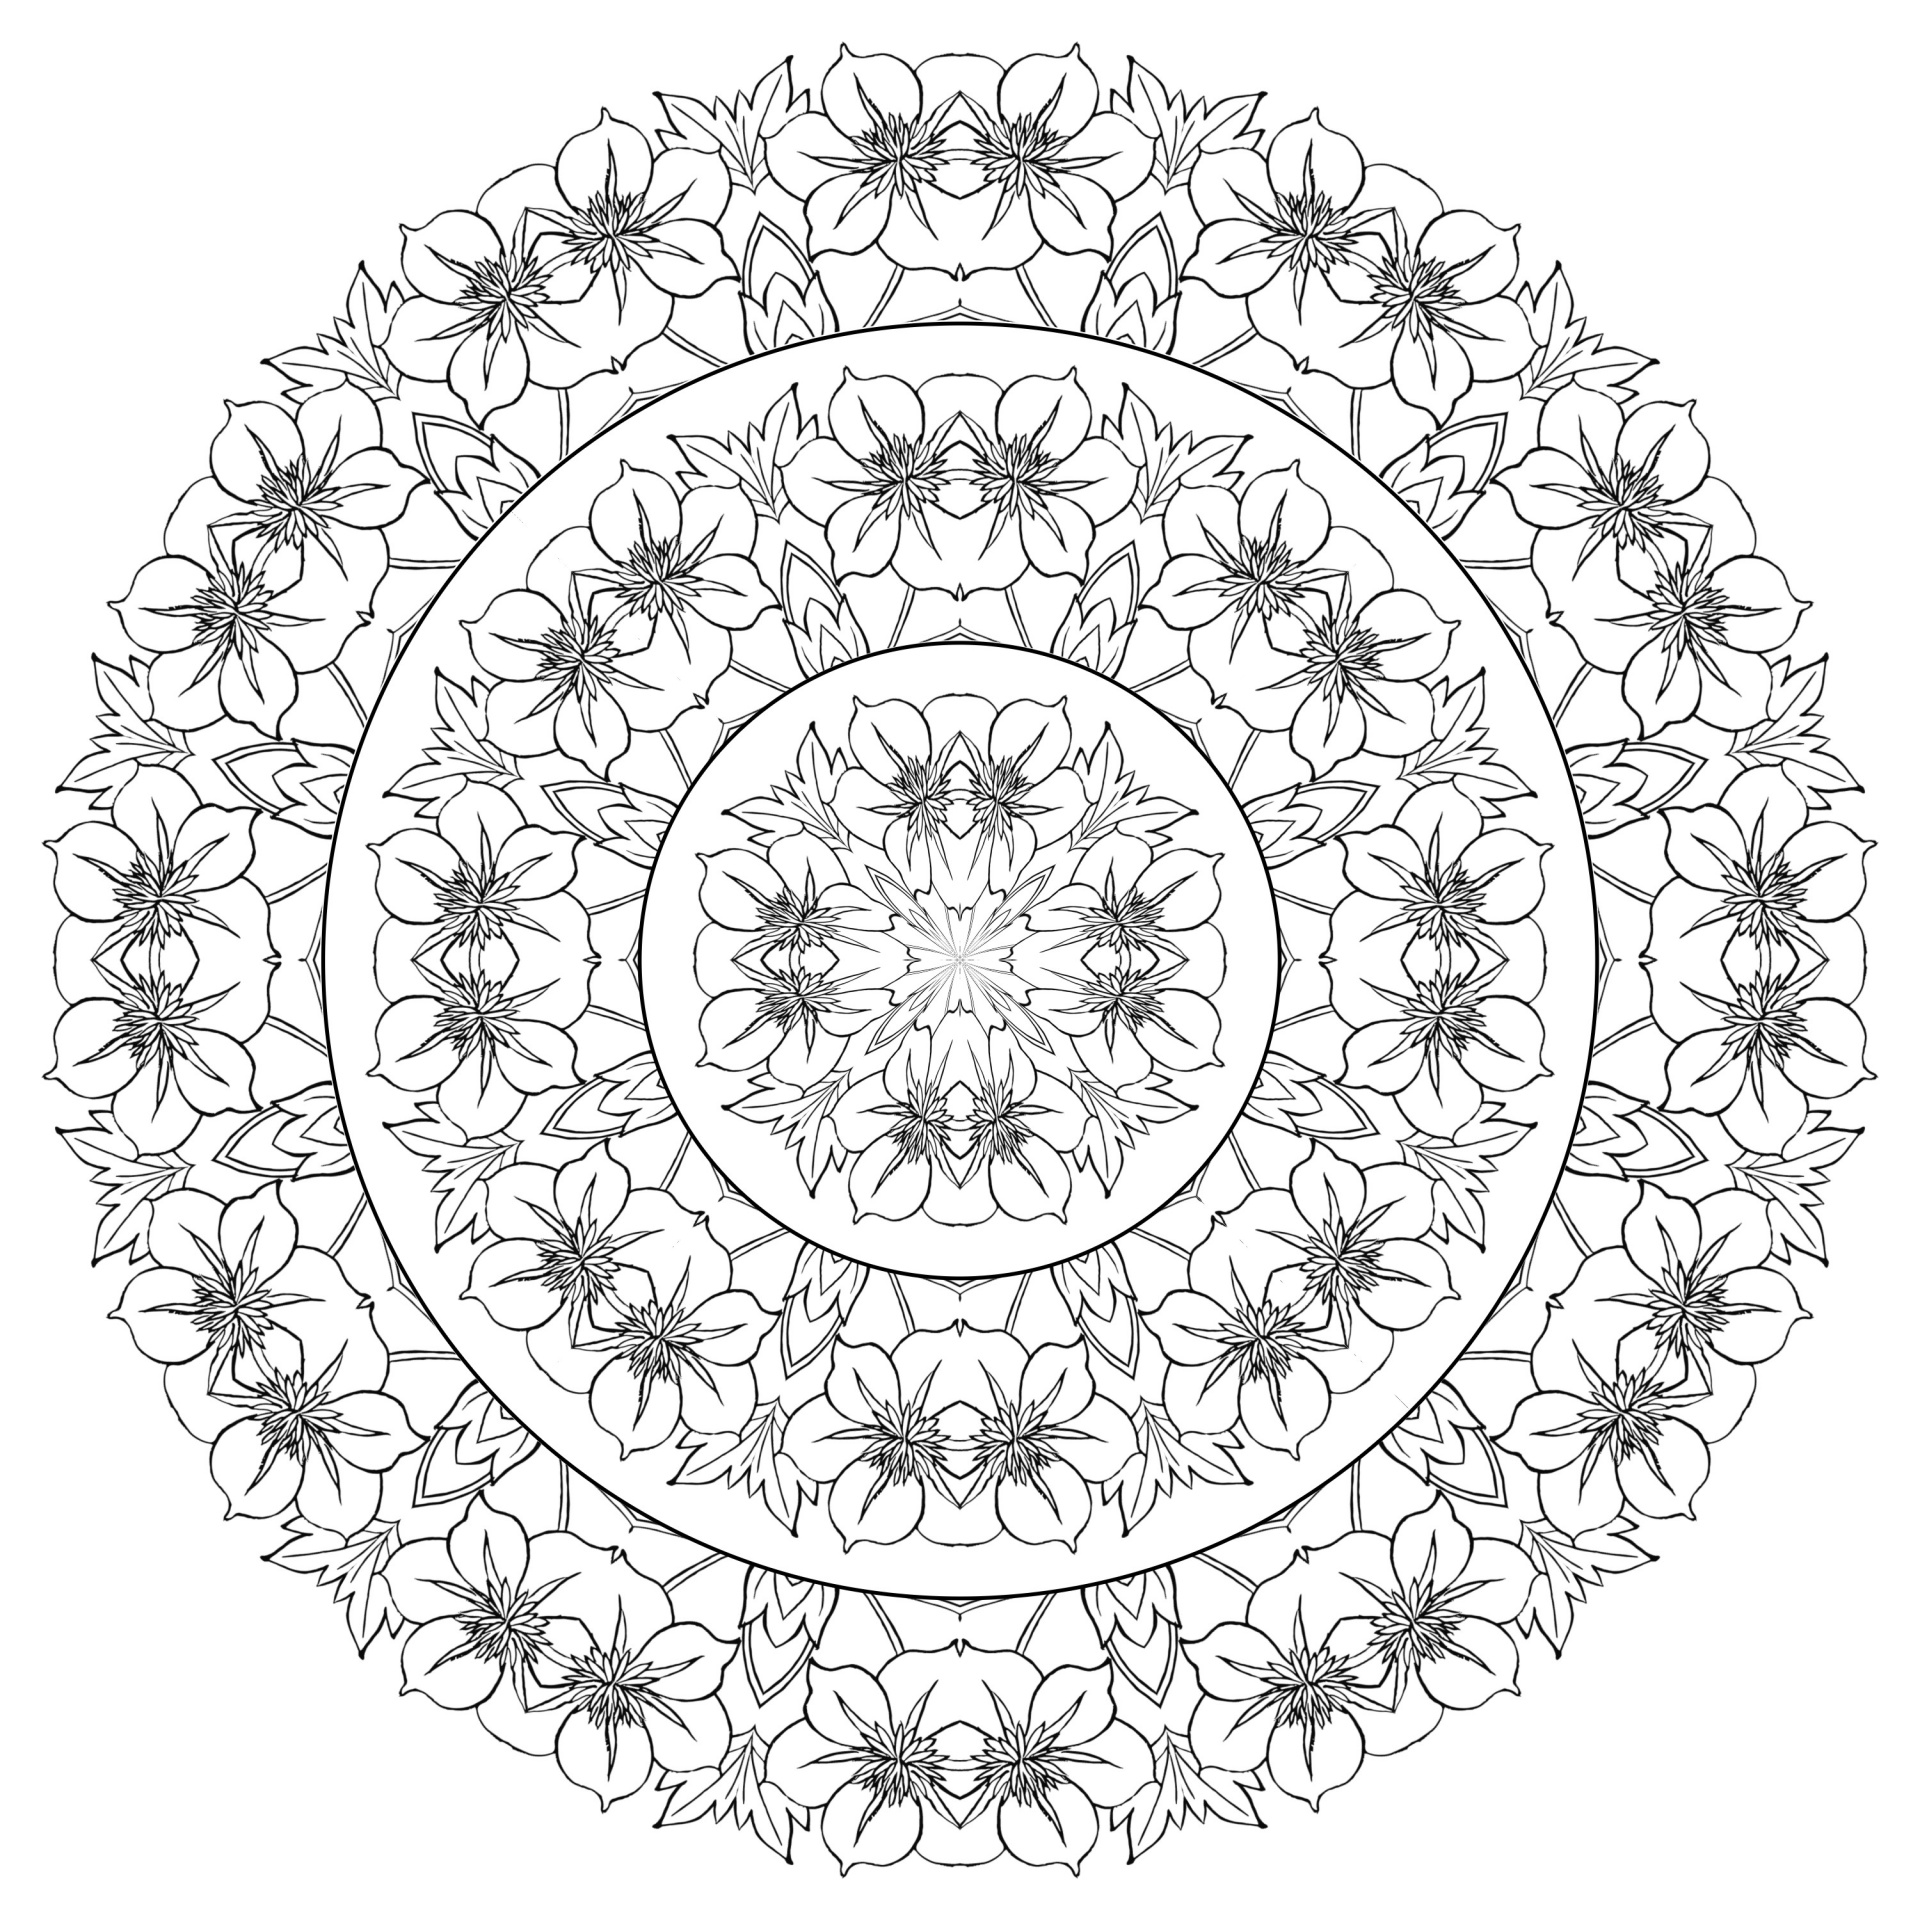 A mandala of identical flowers and leaves. All the flowers and leaves on this mandala are identical, but can be colored individually. This flowery mandala offers a multitude of possibilities to give free rein to your creativity and create a unique coloring scheme that reflects your personality.